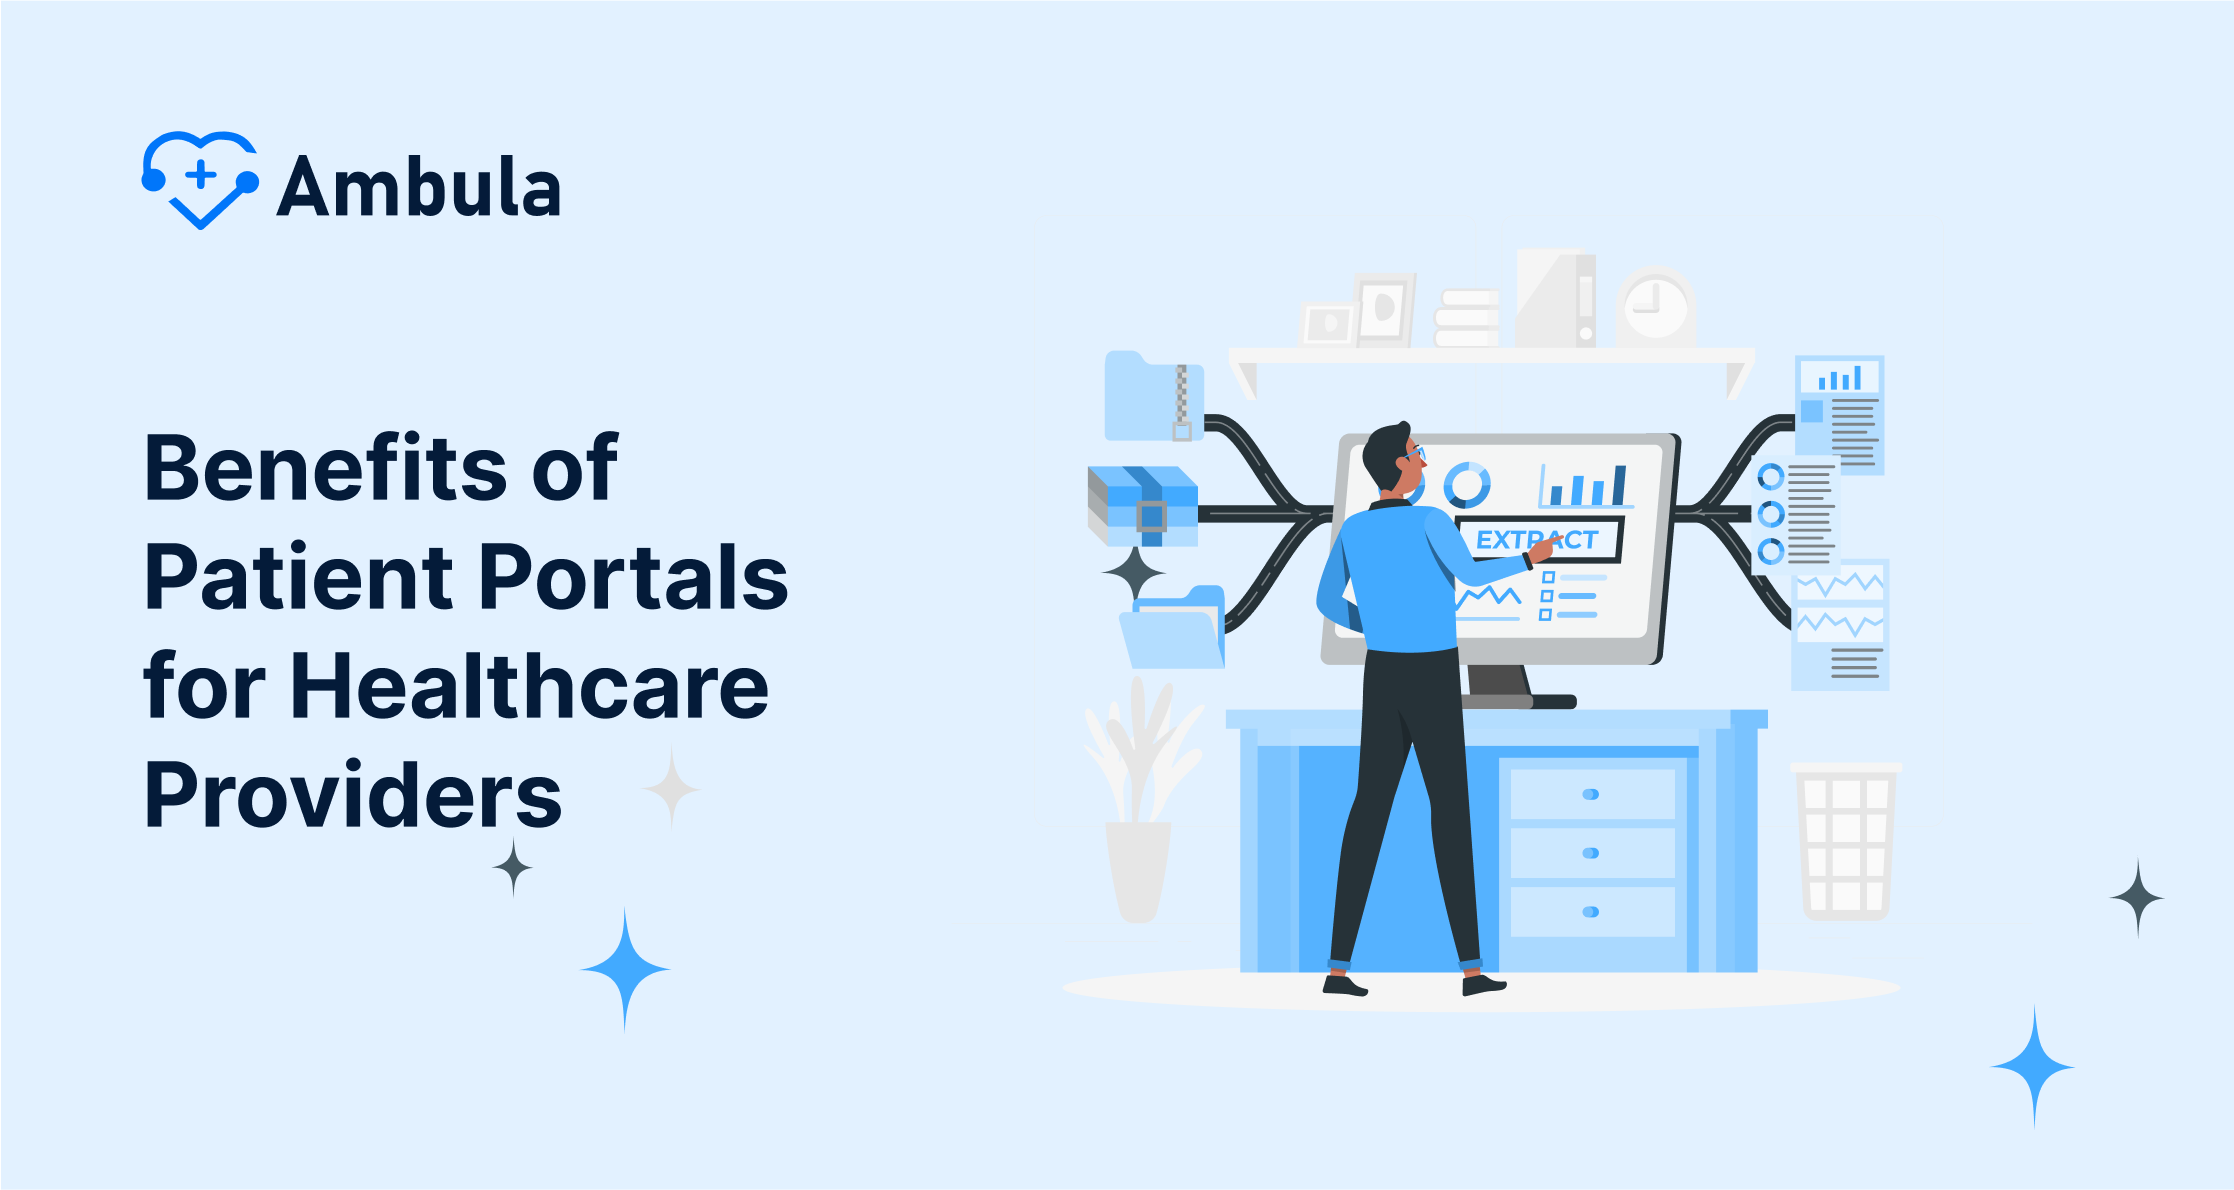 Benefits of Patient Portals for Healthcare Providers